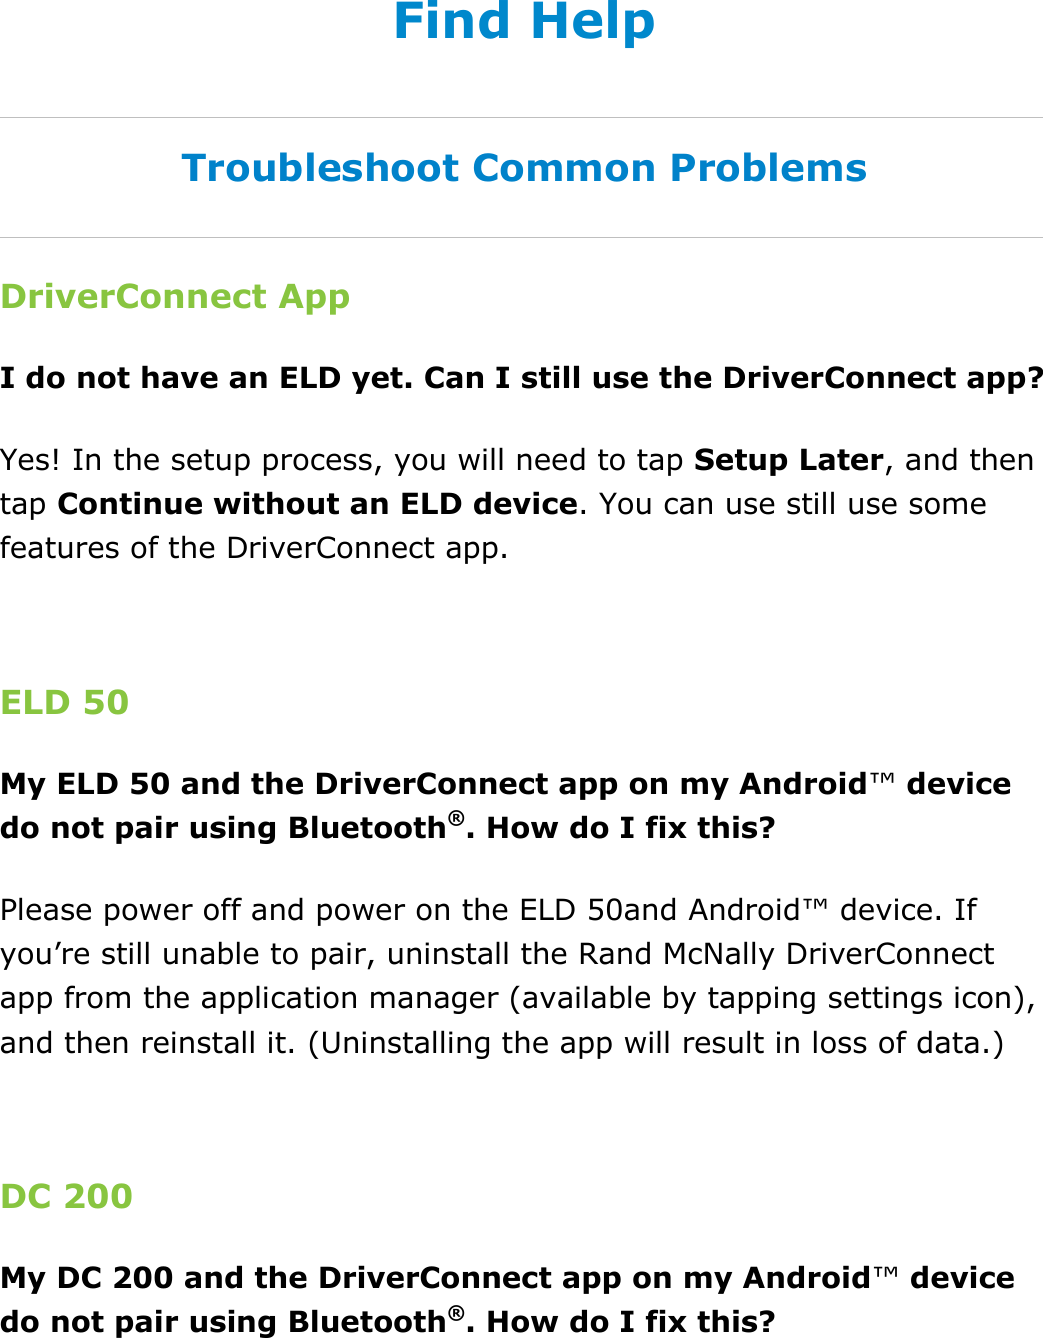  DriverConnect User Guide  93 © 2017, Rand McNally, Inc. Find Help Troubleshoot Common Problems DriverConnect App I do not have an ELD yet. Can I still use the DriverConnect app? Yes! In the setup process, you will need to tap Setup Later, and then tap Continue without an ELD device. You can use still use some features of the DriverConnect app.  ELD 50 My ELD 50 and the DriverConnect app on my Android™ device do not pair using Bluetooth®. How do I fix this? Please power off and power on the ELD 50and Android™ device. If you’re still unable to pair, uninstall the Rand McNally DriverConnect app from the application manager (available by tapping settings icon), and then reinstall it. (Uninstalling the app will result in loss of data.)  DC 200 My DC 200 and the DriverConnect app on my Android™ device do not pair using Bluetooth®. How do I fix this? 